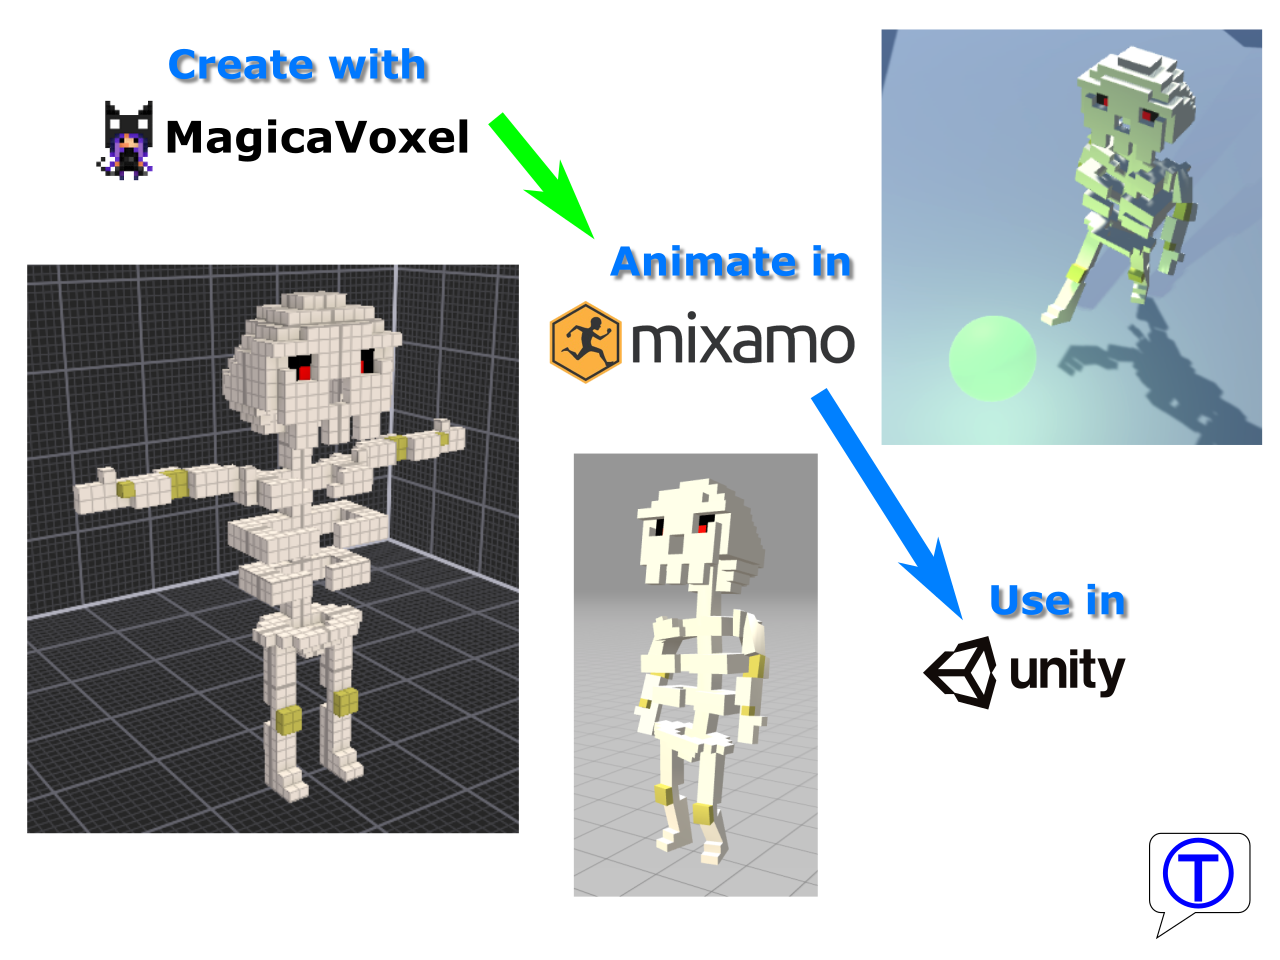 How to create a voxel character in MagicaVoxel, animate it in Mixamo and use it in Unity 3D